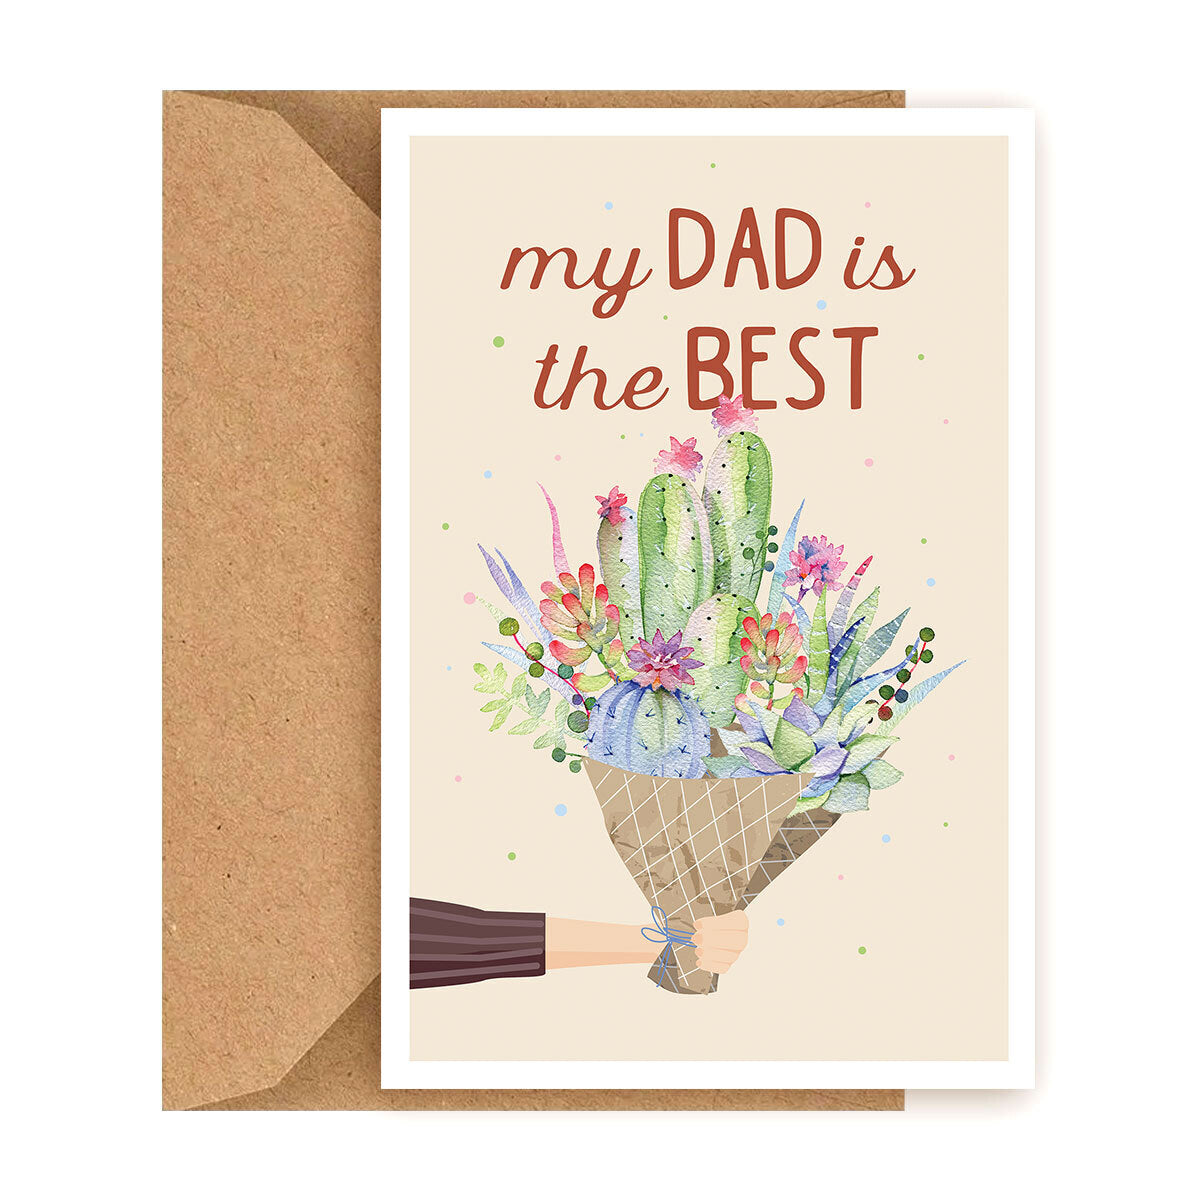 My dad is the best card, Best Dad Card, Dad is the best card, Father's day greeting cards, Father's day succulent card, Father's day cards 2023, Father's Day card ideas, Succulent dad card, card for Father's day, succulent card for Father's day, plant card